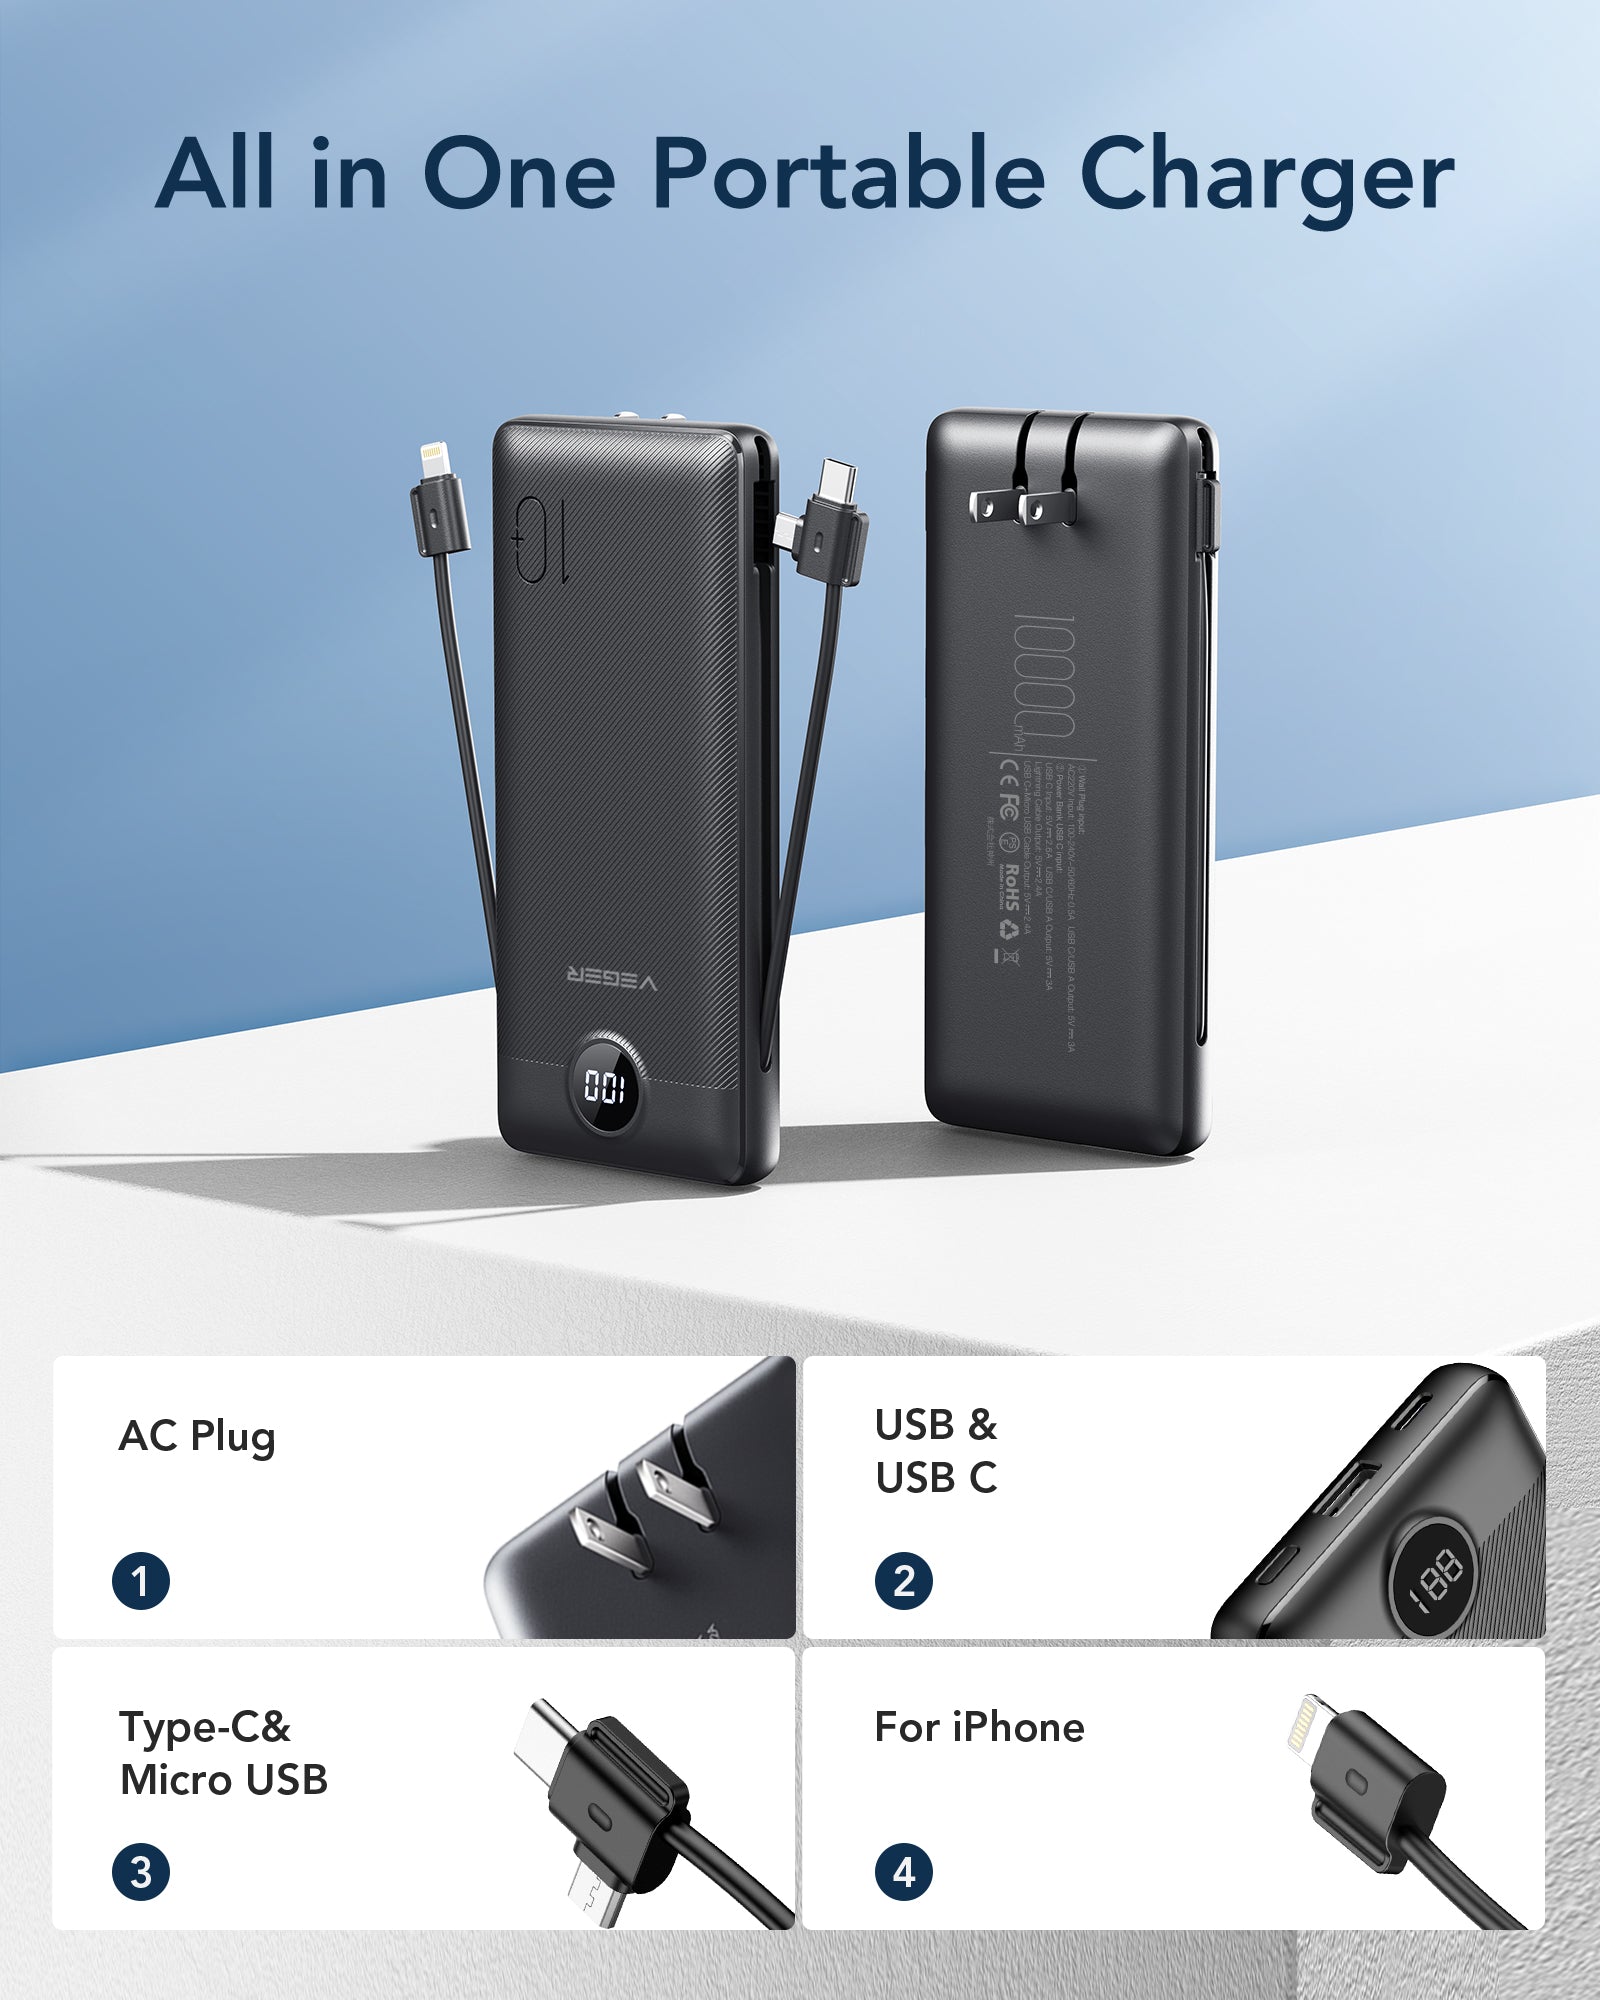 ACE100 Pro(US) Built-in Cable and AC Plug Power Bank